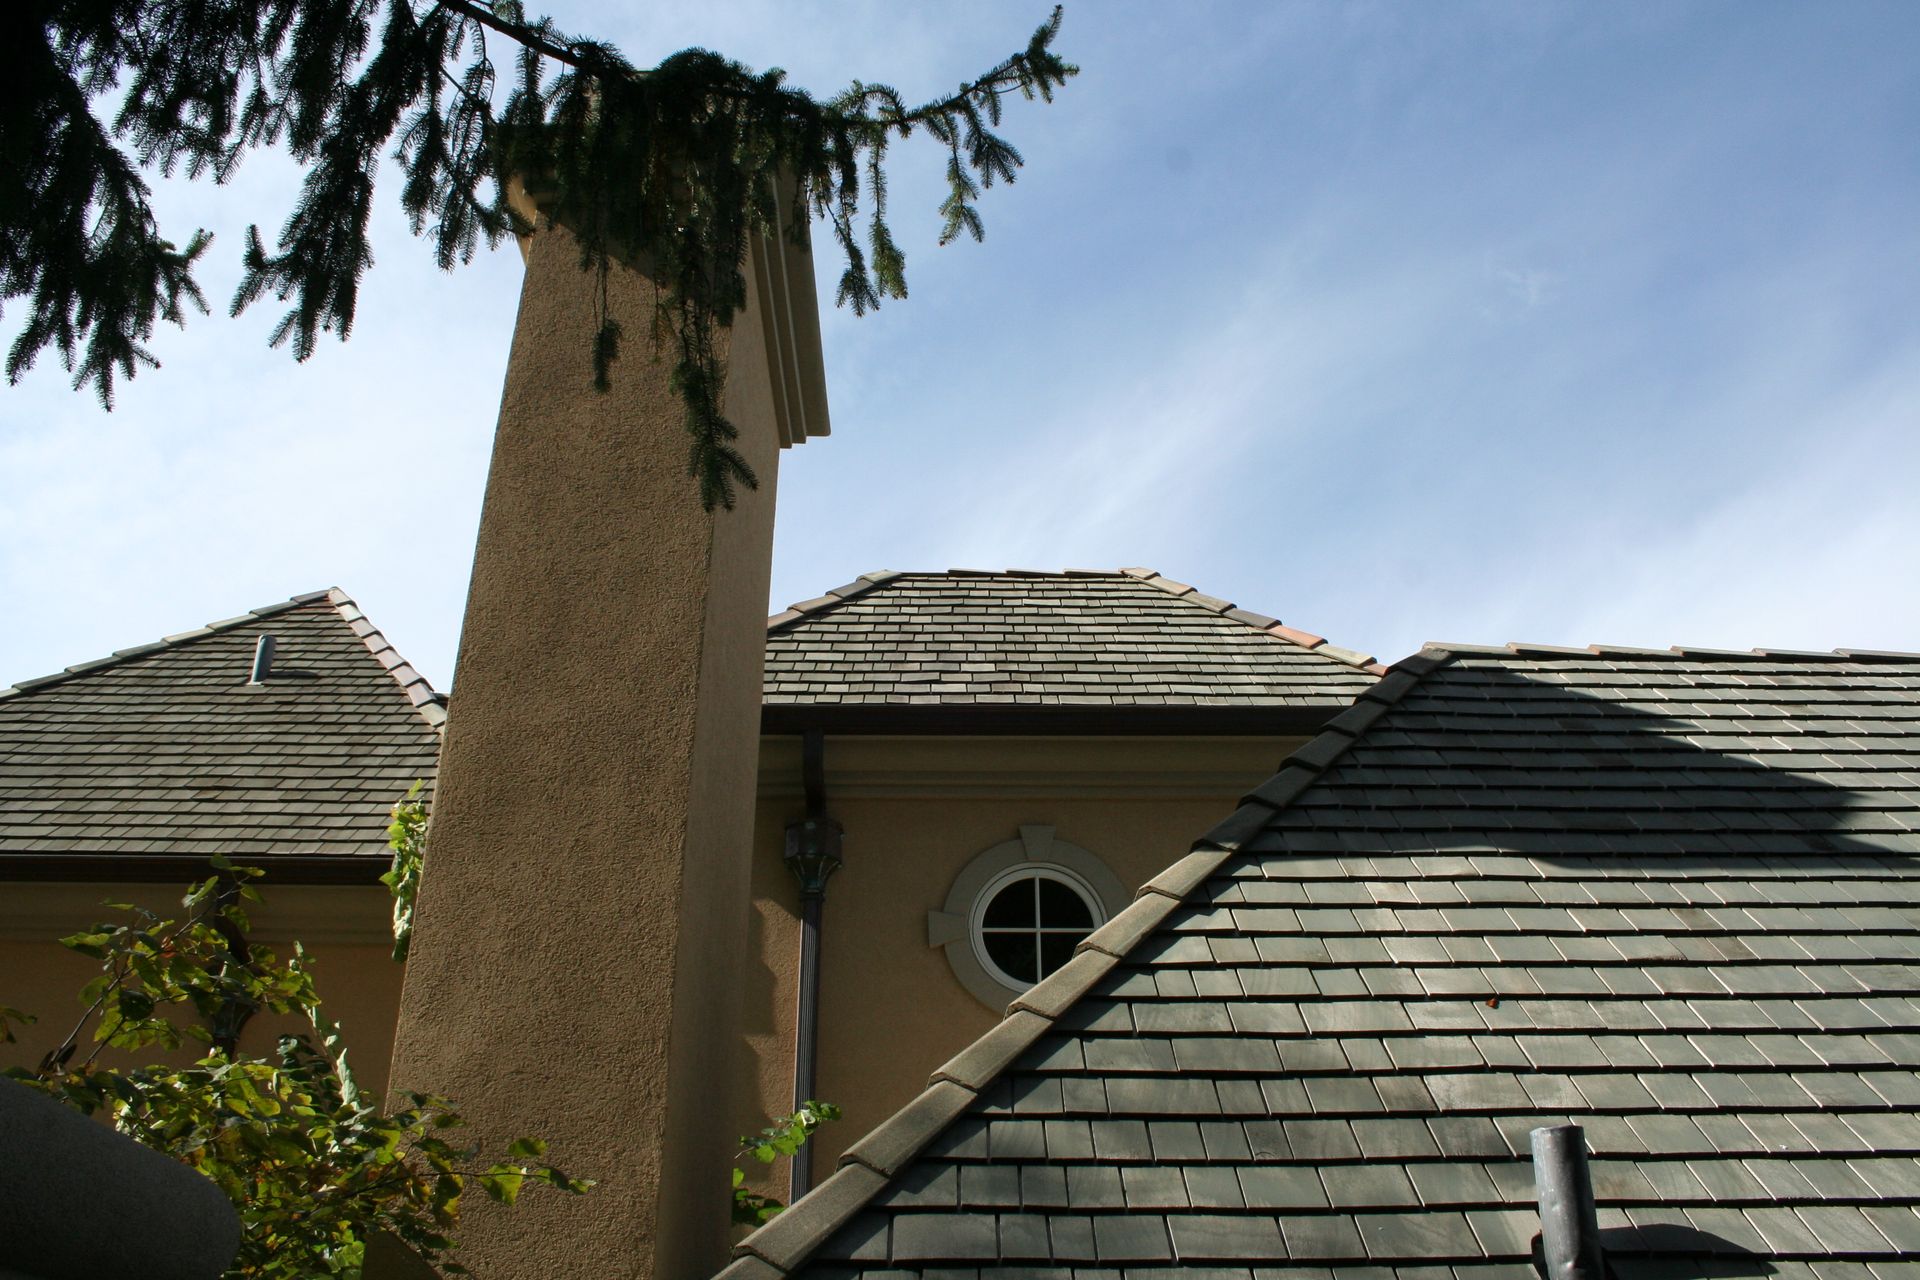 Harmonious blend of slate roofing and tile flashings, showcasing an elegant roofing masterpiece